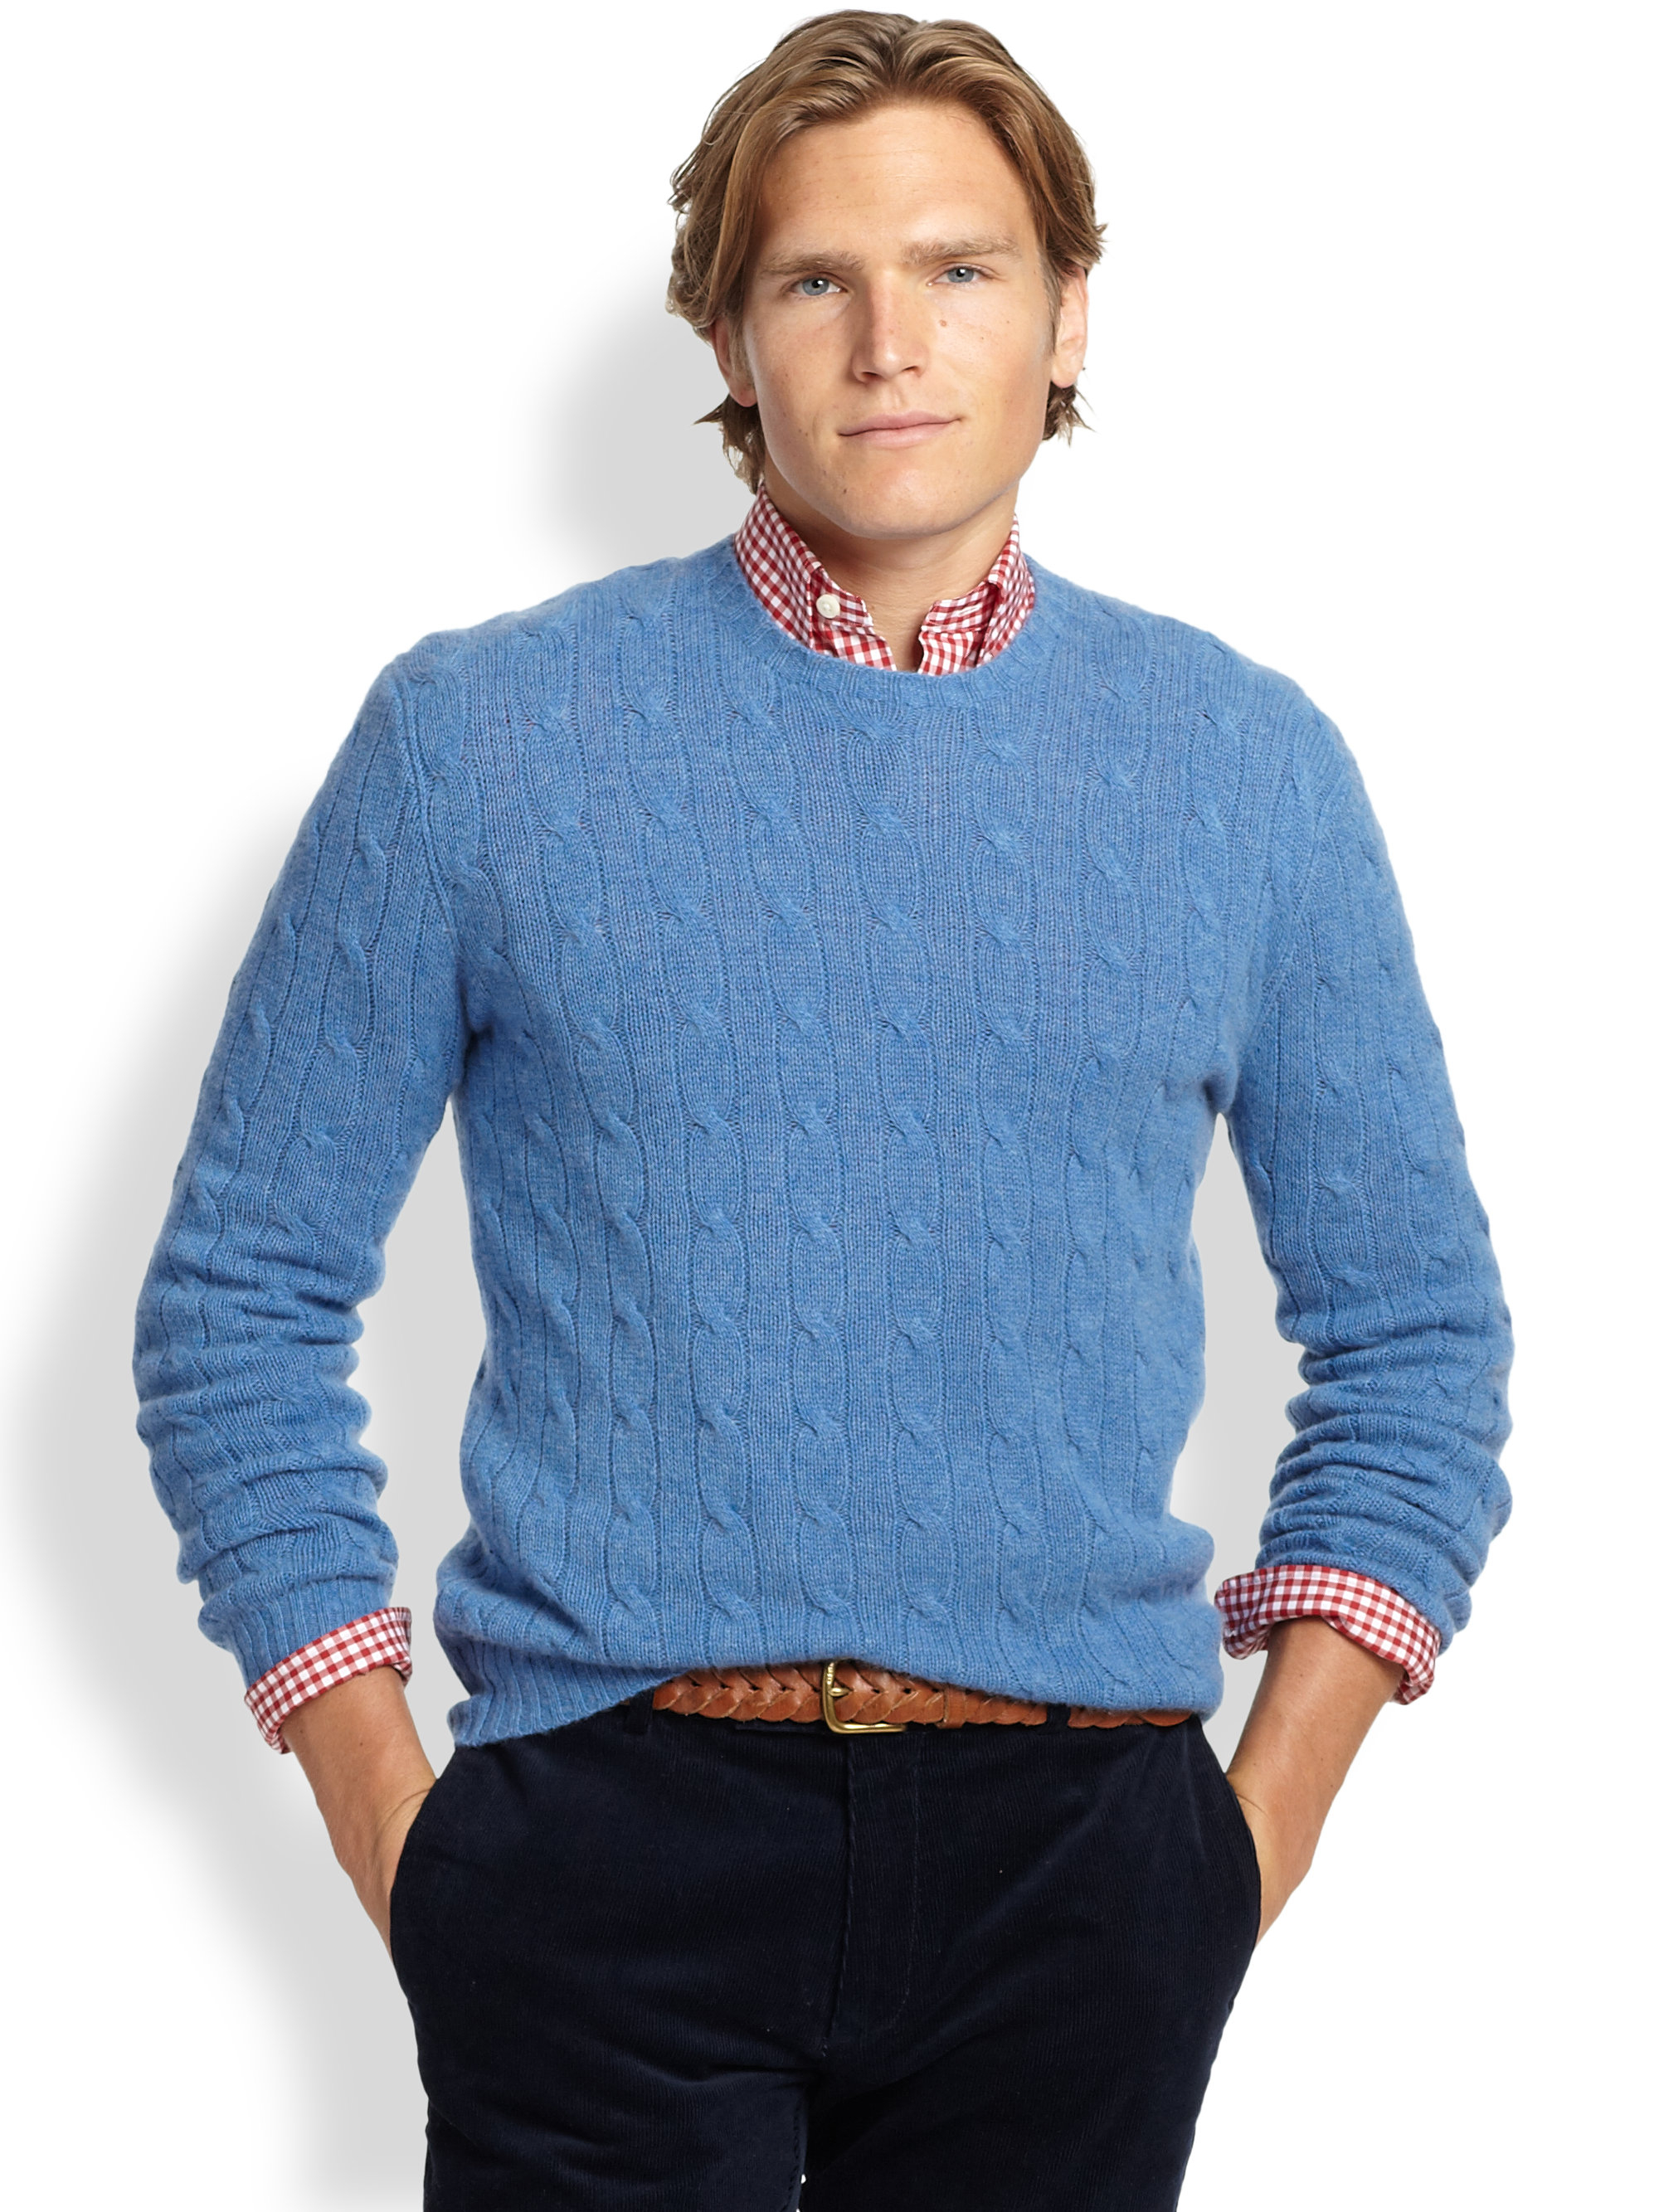 Lyst - Polo Ralph Lauren Cable-knit Cashmere Sweater in Blue for Men